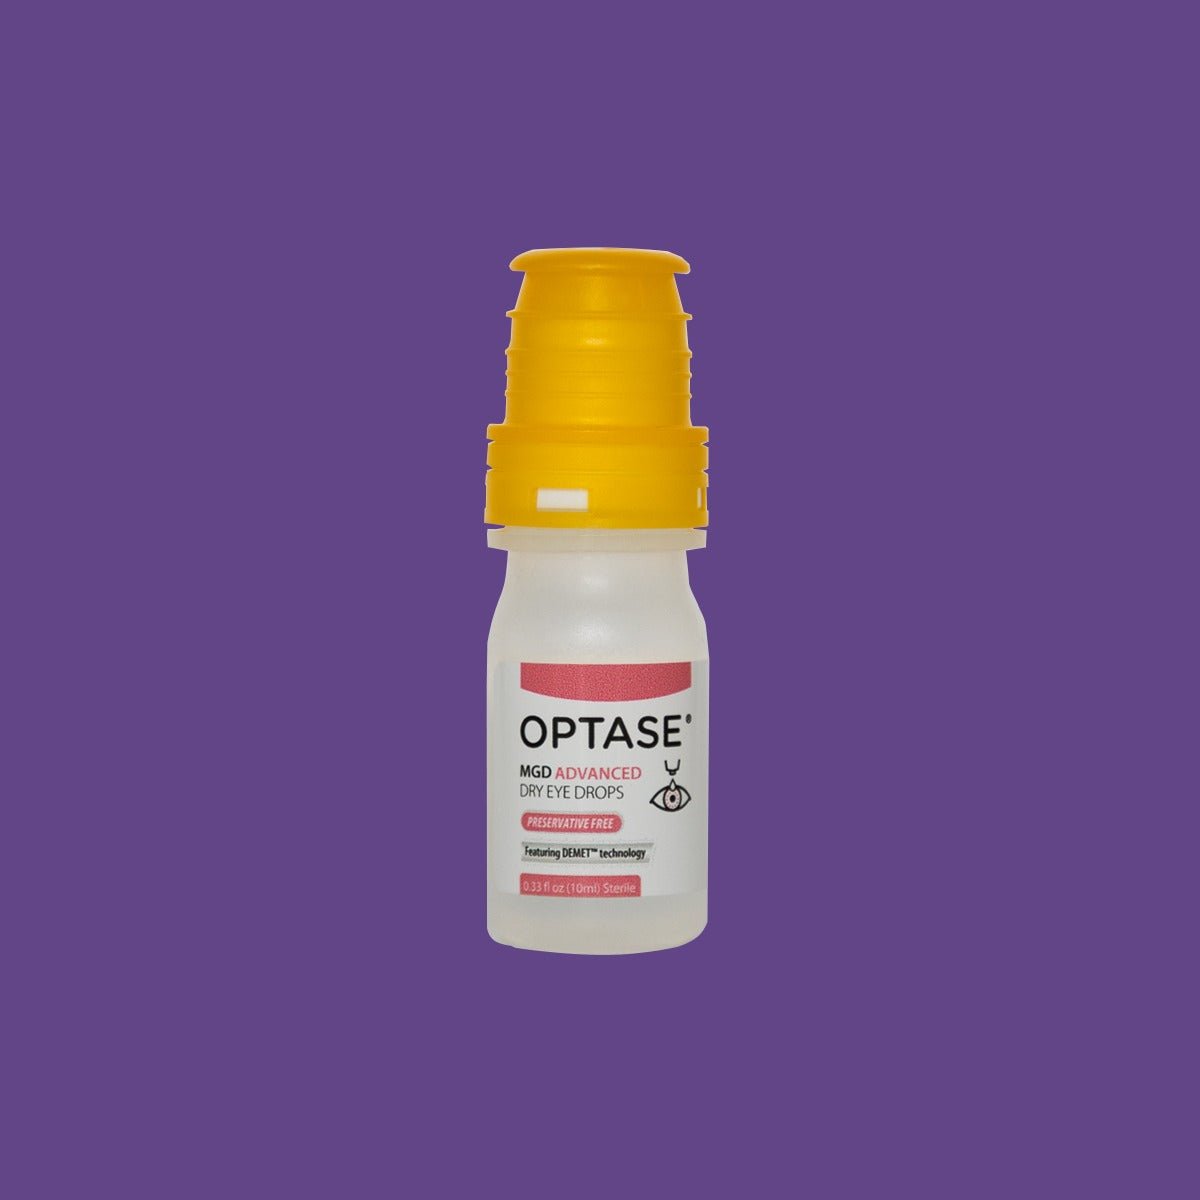 Optase MGD Advanced Dry Eye Drops Preservative-Free 2 Month Supply (300 drops) - DryEye Rescue Store